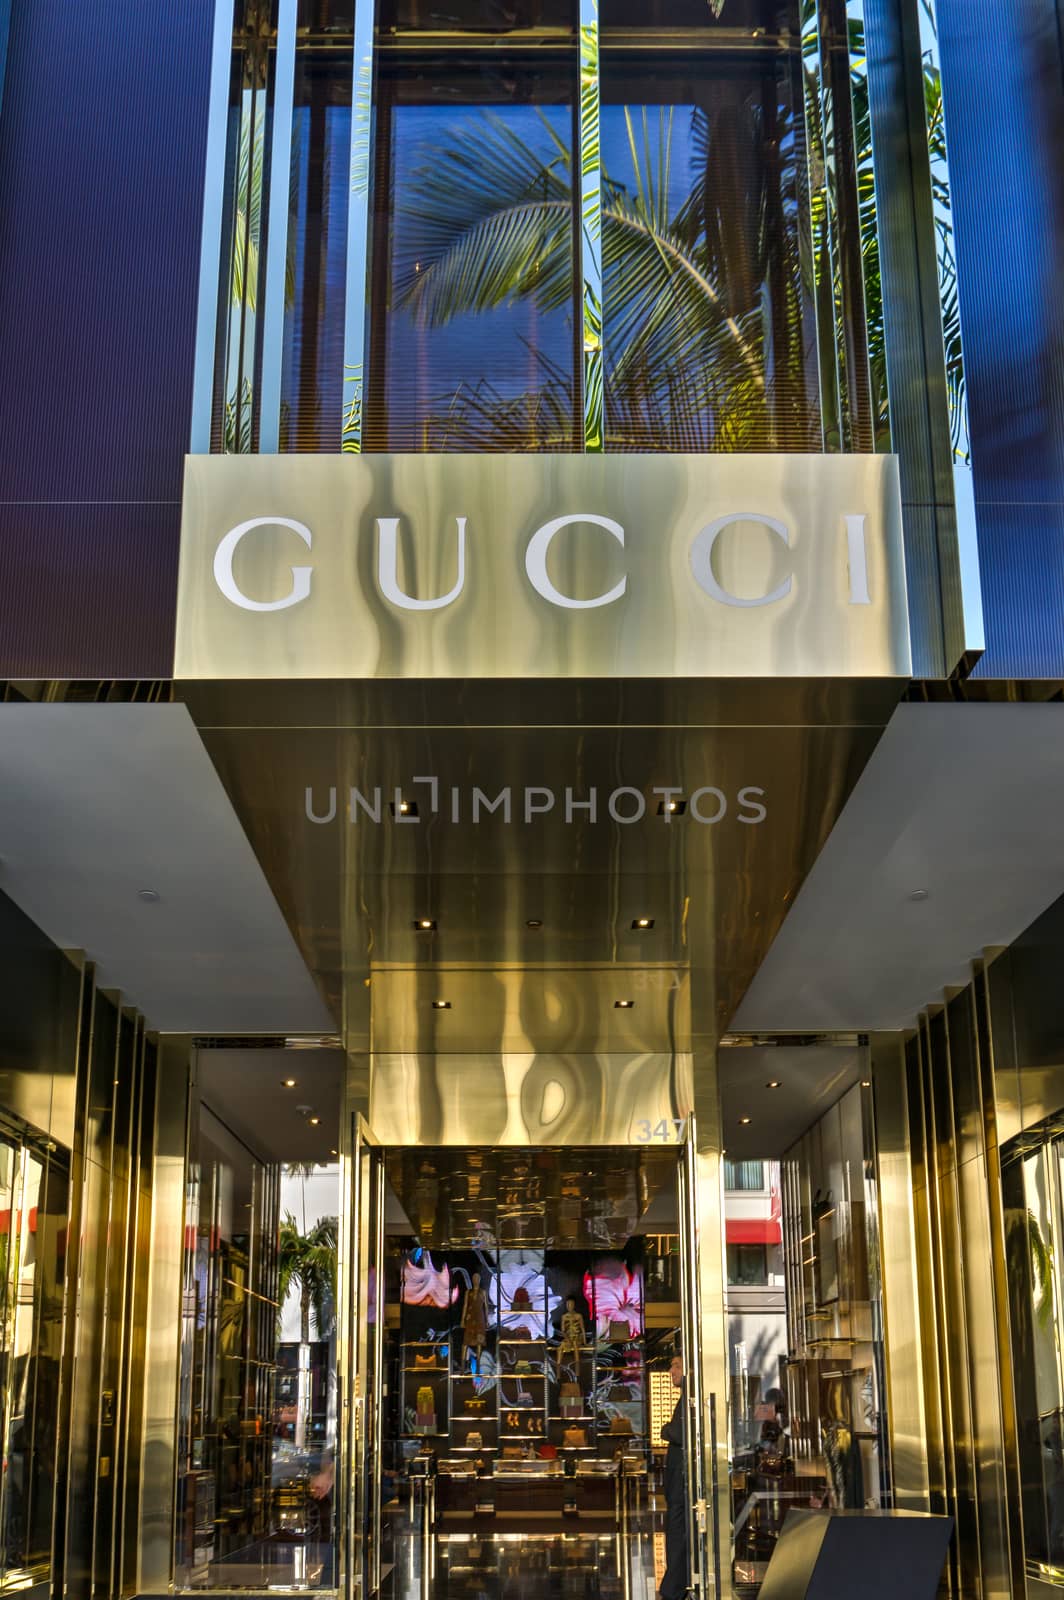 BEVERLY HILLS, CA/USA - JANUARY 3, 2015: Gucci retail store exterior. Gucci is an Italian fashion and leather goods brand with retail stores throughout the world.